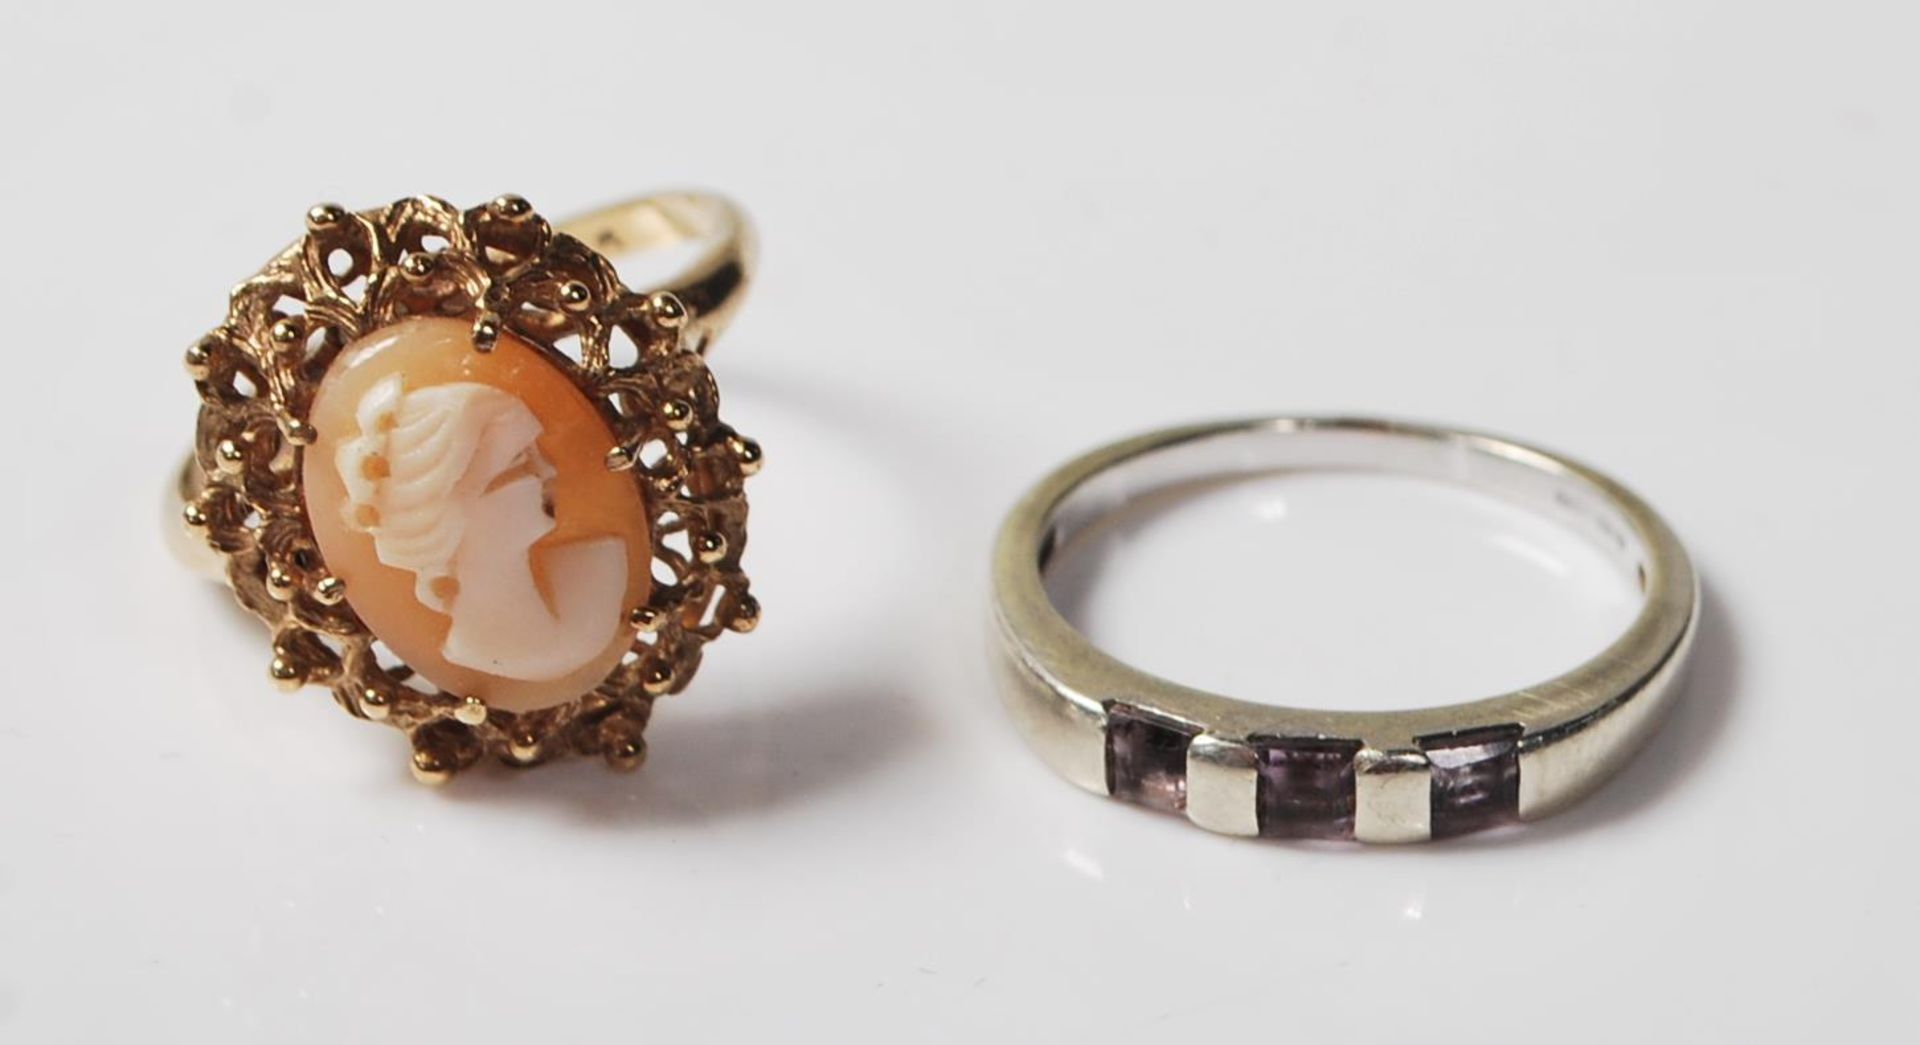 TWO 9CT GOLD RINGS. CAMEO RING - WHITE GOLD RING. - Image 2 of 7